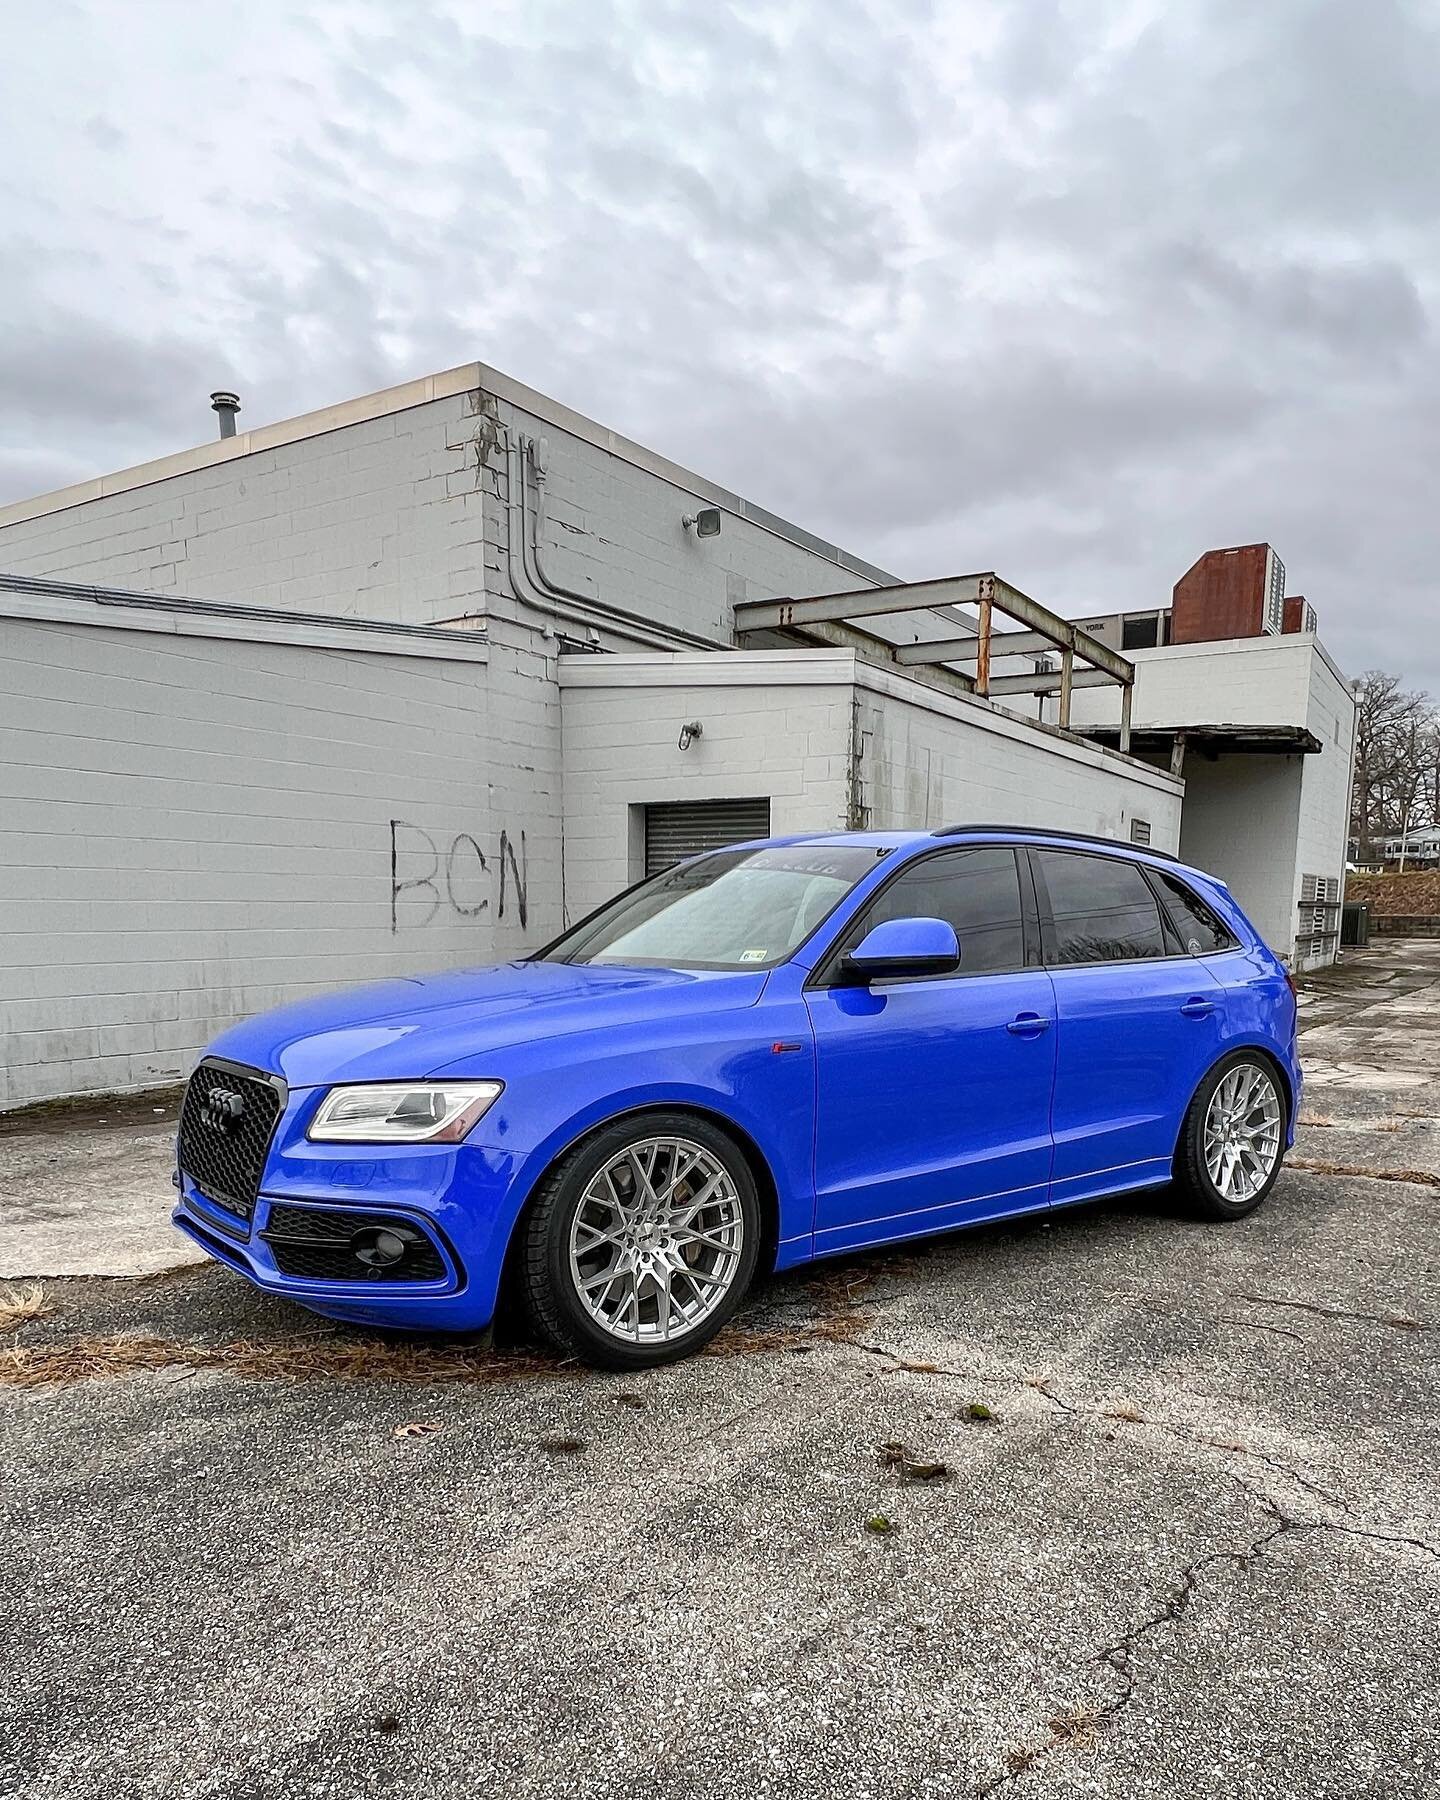 Alright, I guess I teased this one long enough. Tony&rsquo;s SQ5 received a full wrap in @inozetek Maritime Blue. A classic Porsche color that has always been a favorite.
&bull;
Contact for a quote!
Crucialwraps.com
&bull;
Vehicle Wraps
Livery Design